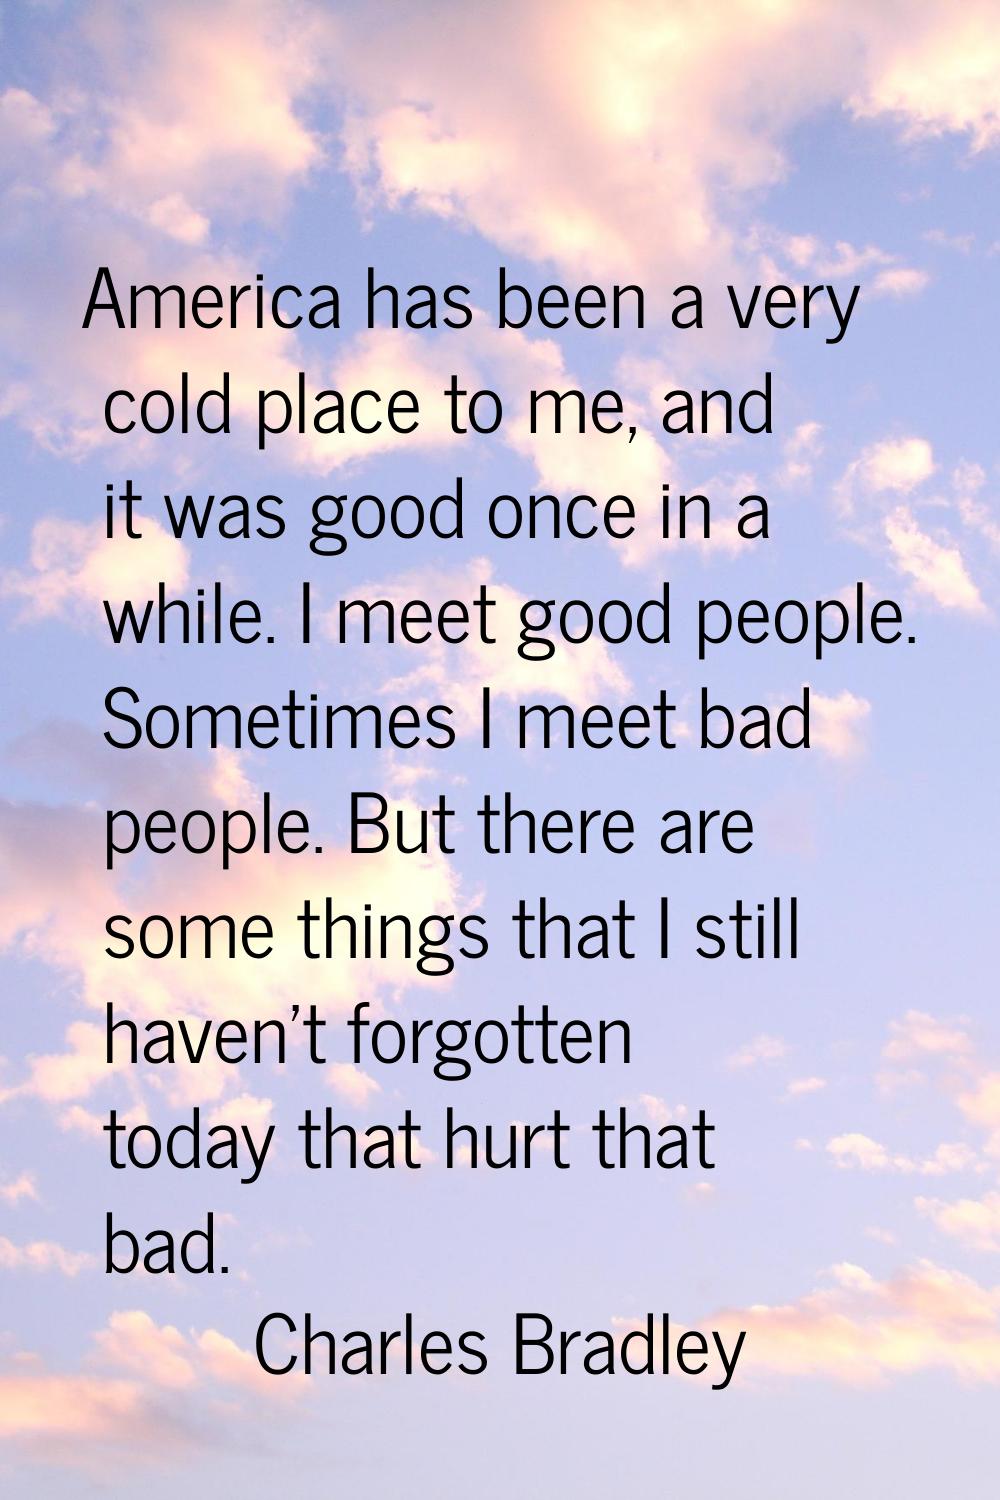 America has been a very cold place to me, and it was good once in a while. I meet good people. Some